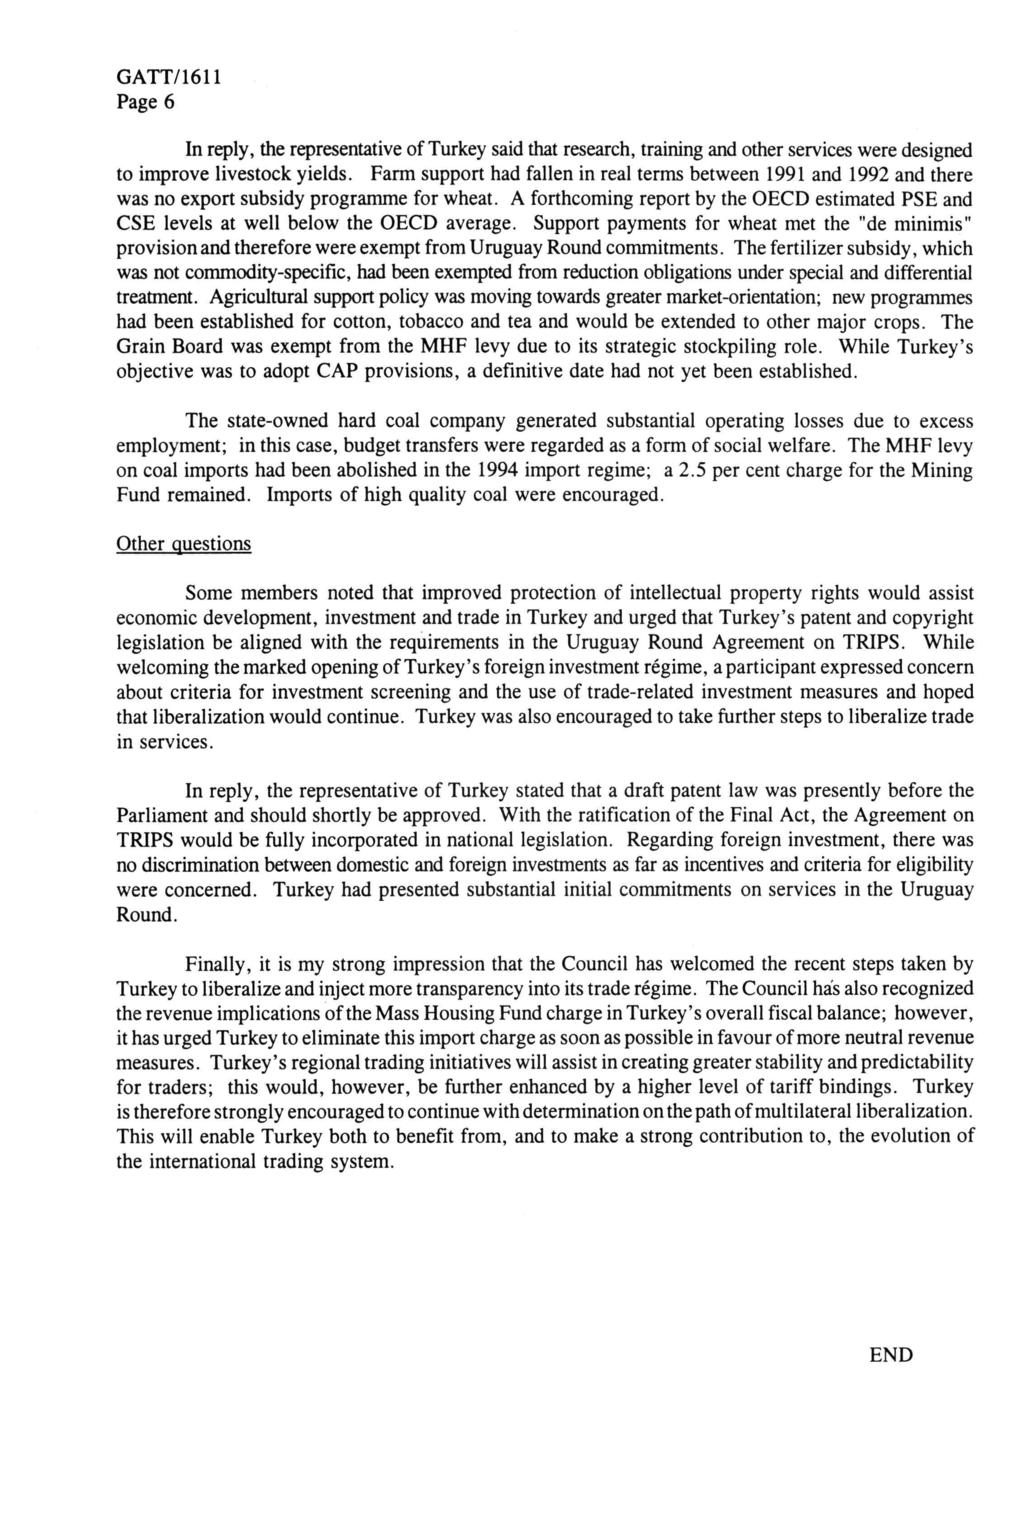 Page 6 In reply, the representative of Turkey said that research, training and other services were designed to improve livestock yields.